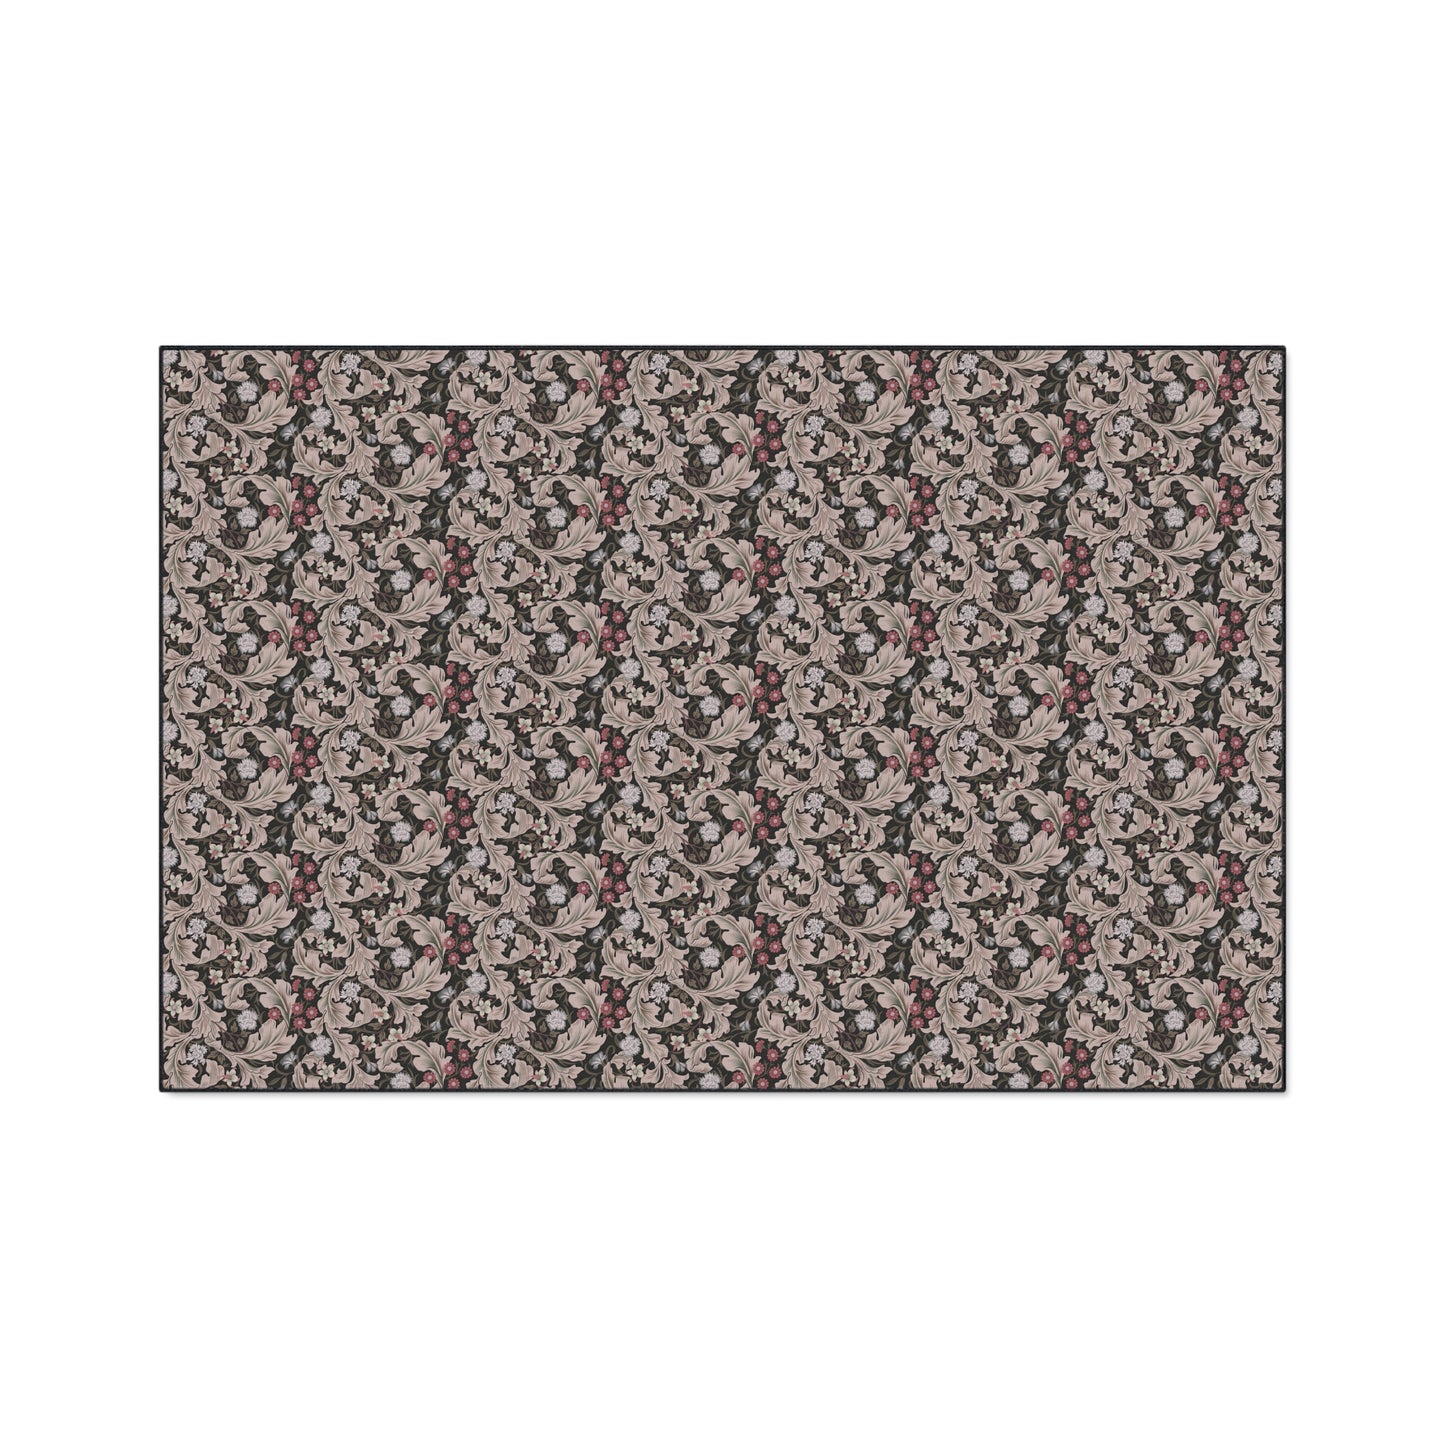 william-morris-co-heavy-duty-floor-mat-leicester-collection-mocha-1